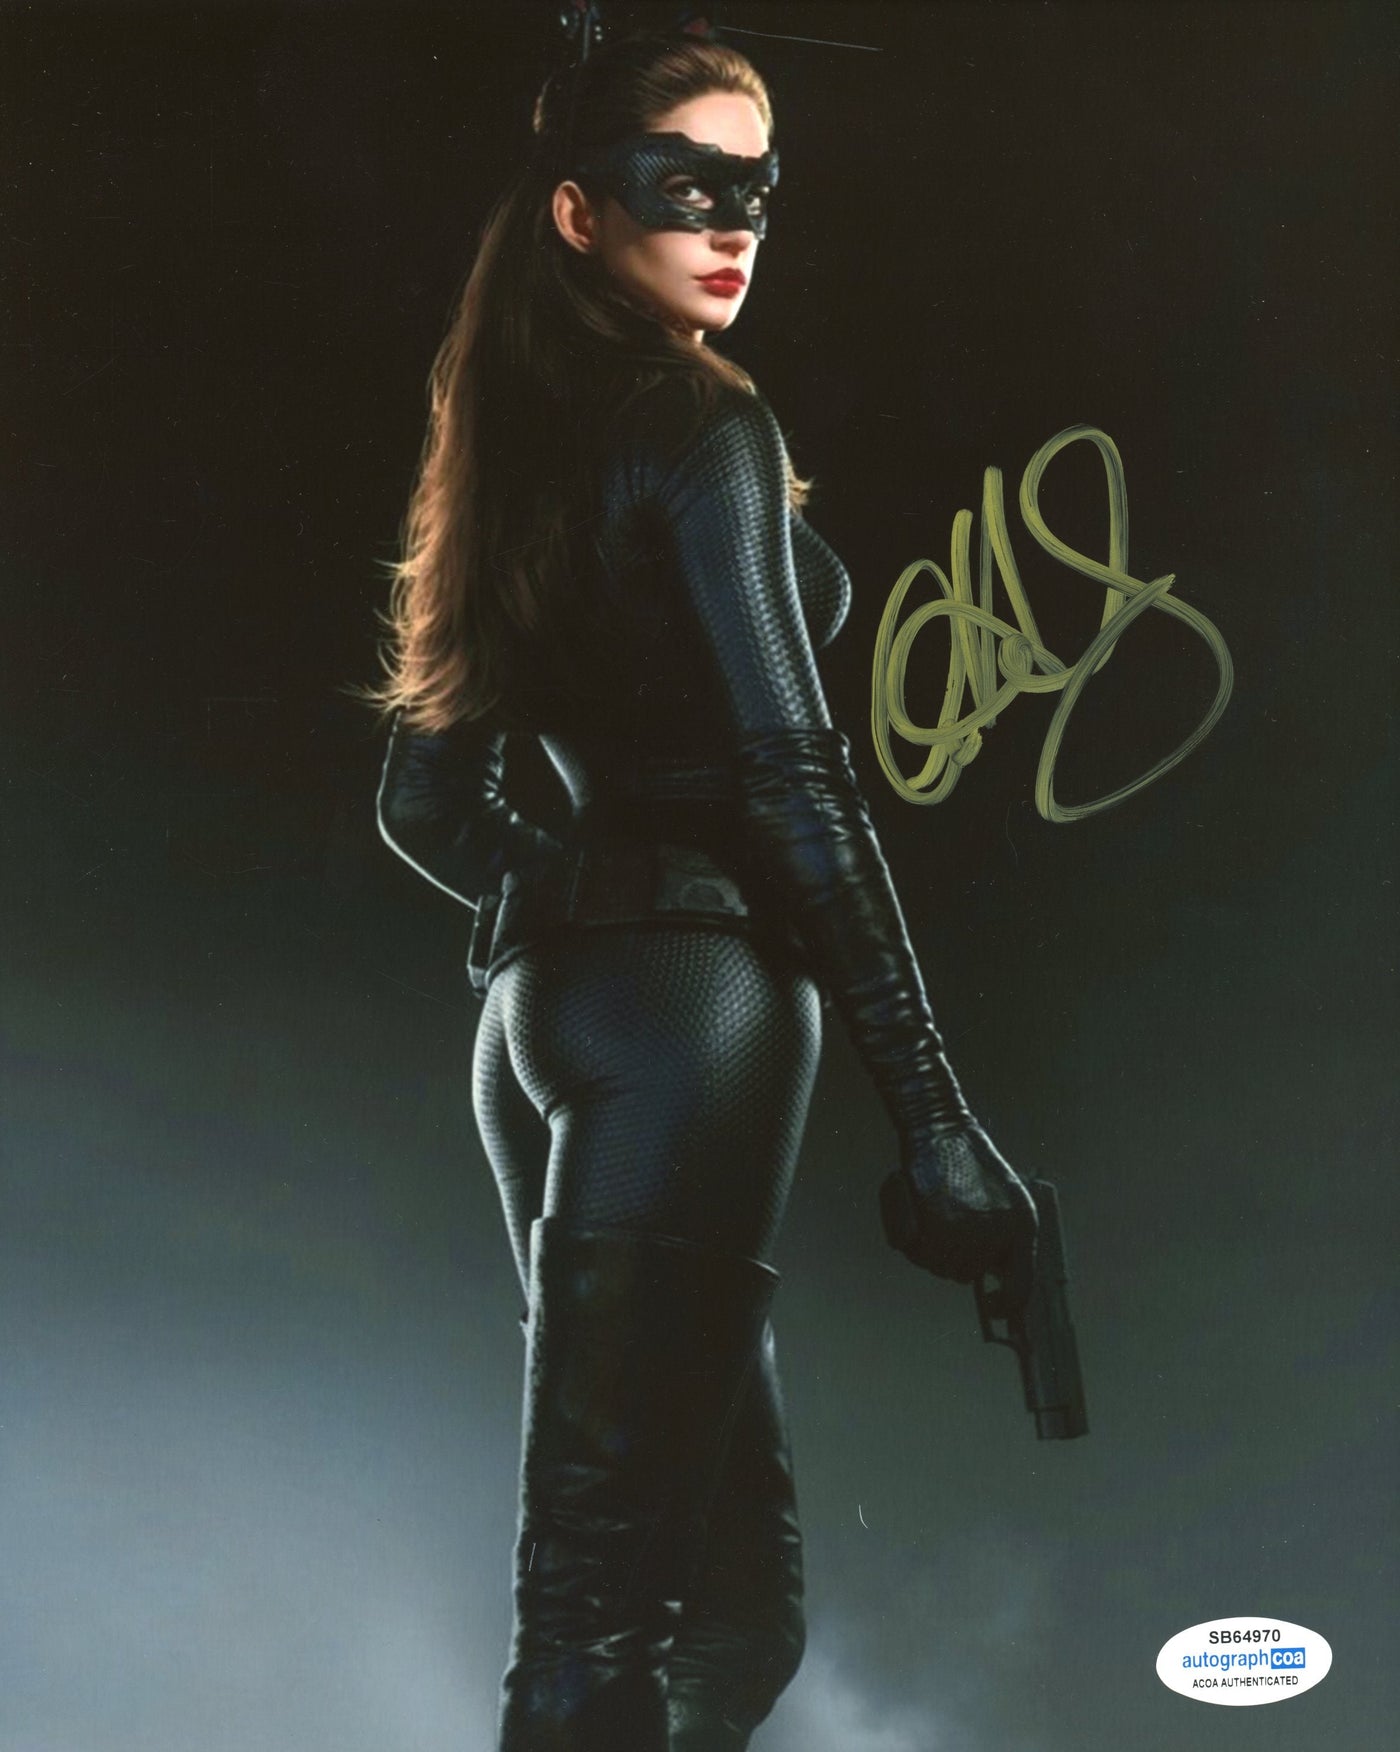 Anne Hathaway Signed 8x10 Photo The Dark Knight Rises Autographed ACOA #3